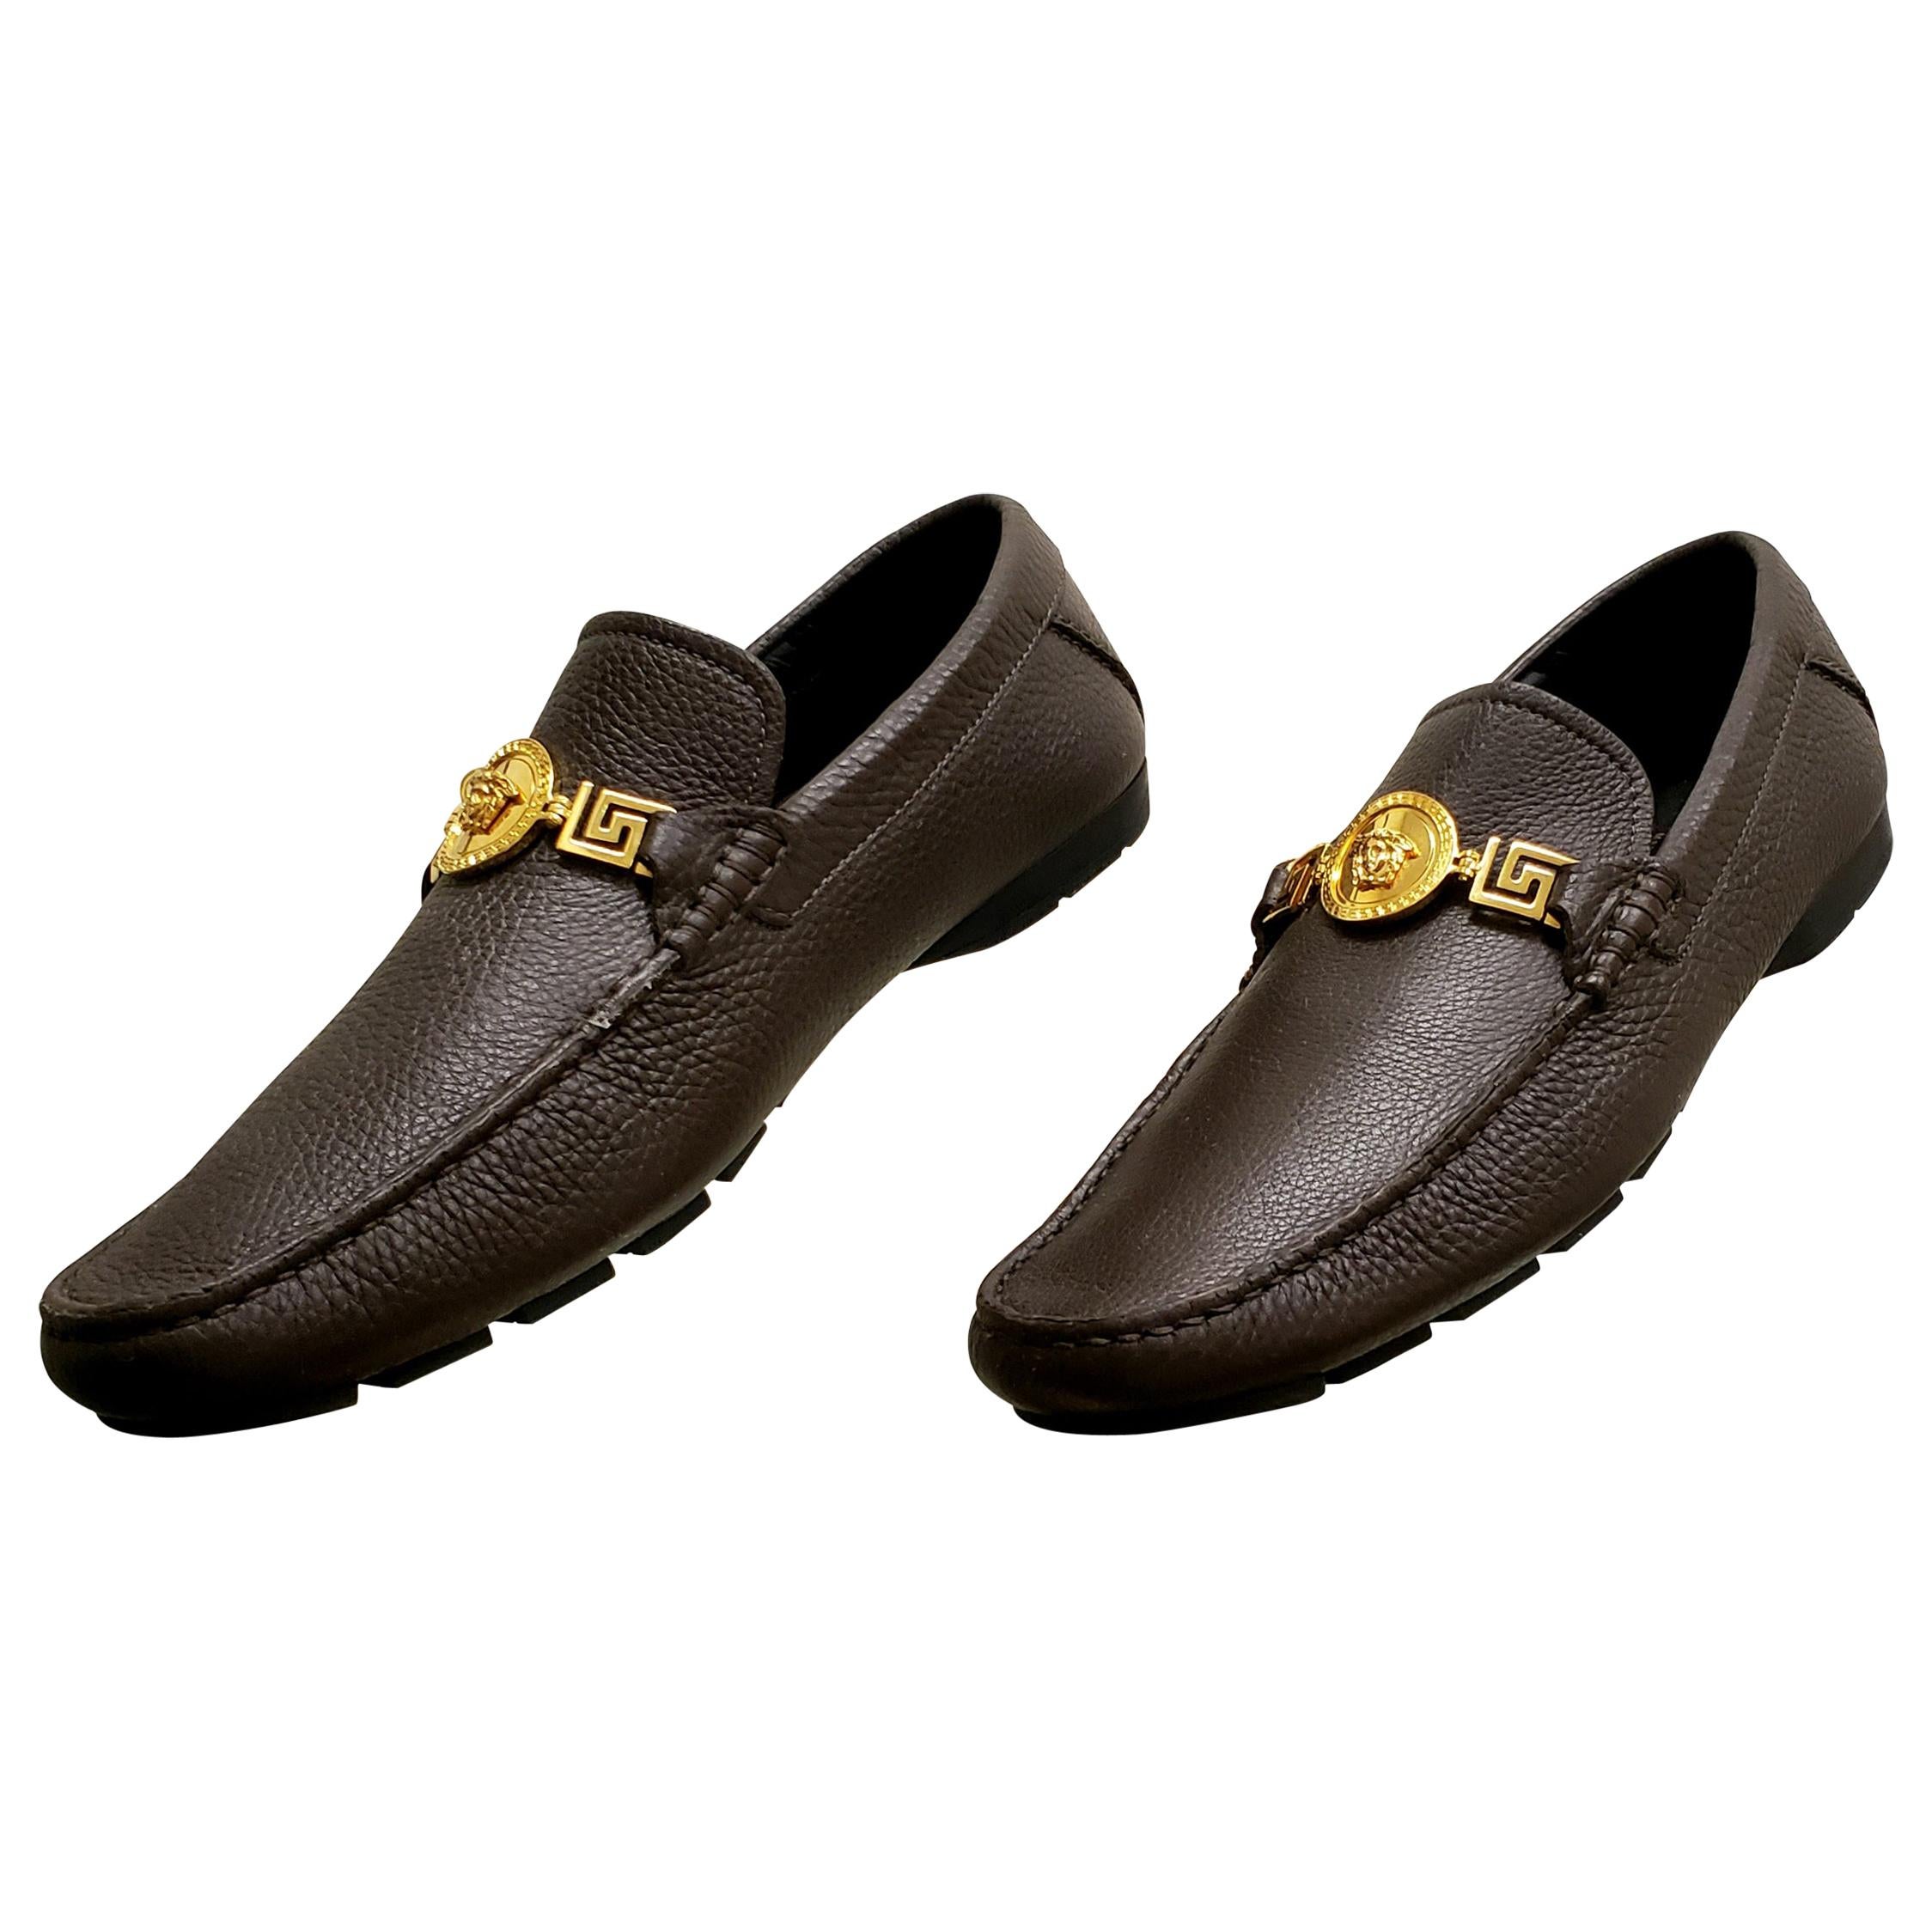 VERSACE BROWN LEATHER LOAFER SHOES w/MEDUSA MEDALLION as seen in movie Sz 9.5 For Sale